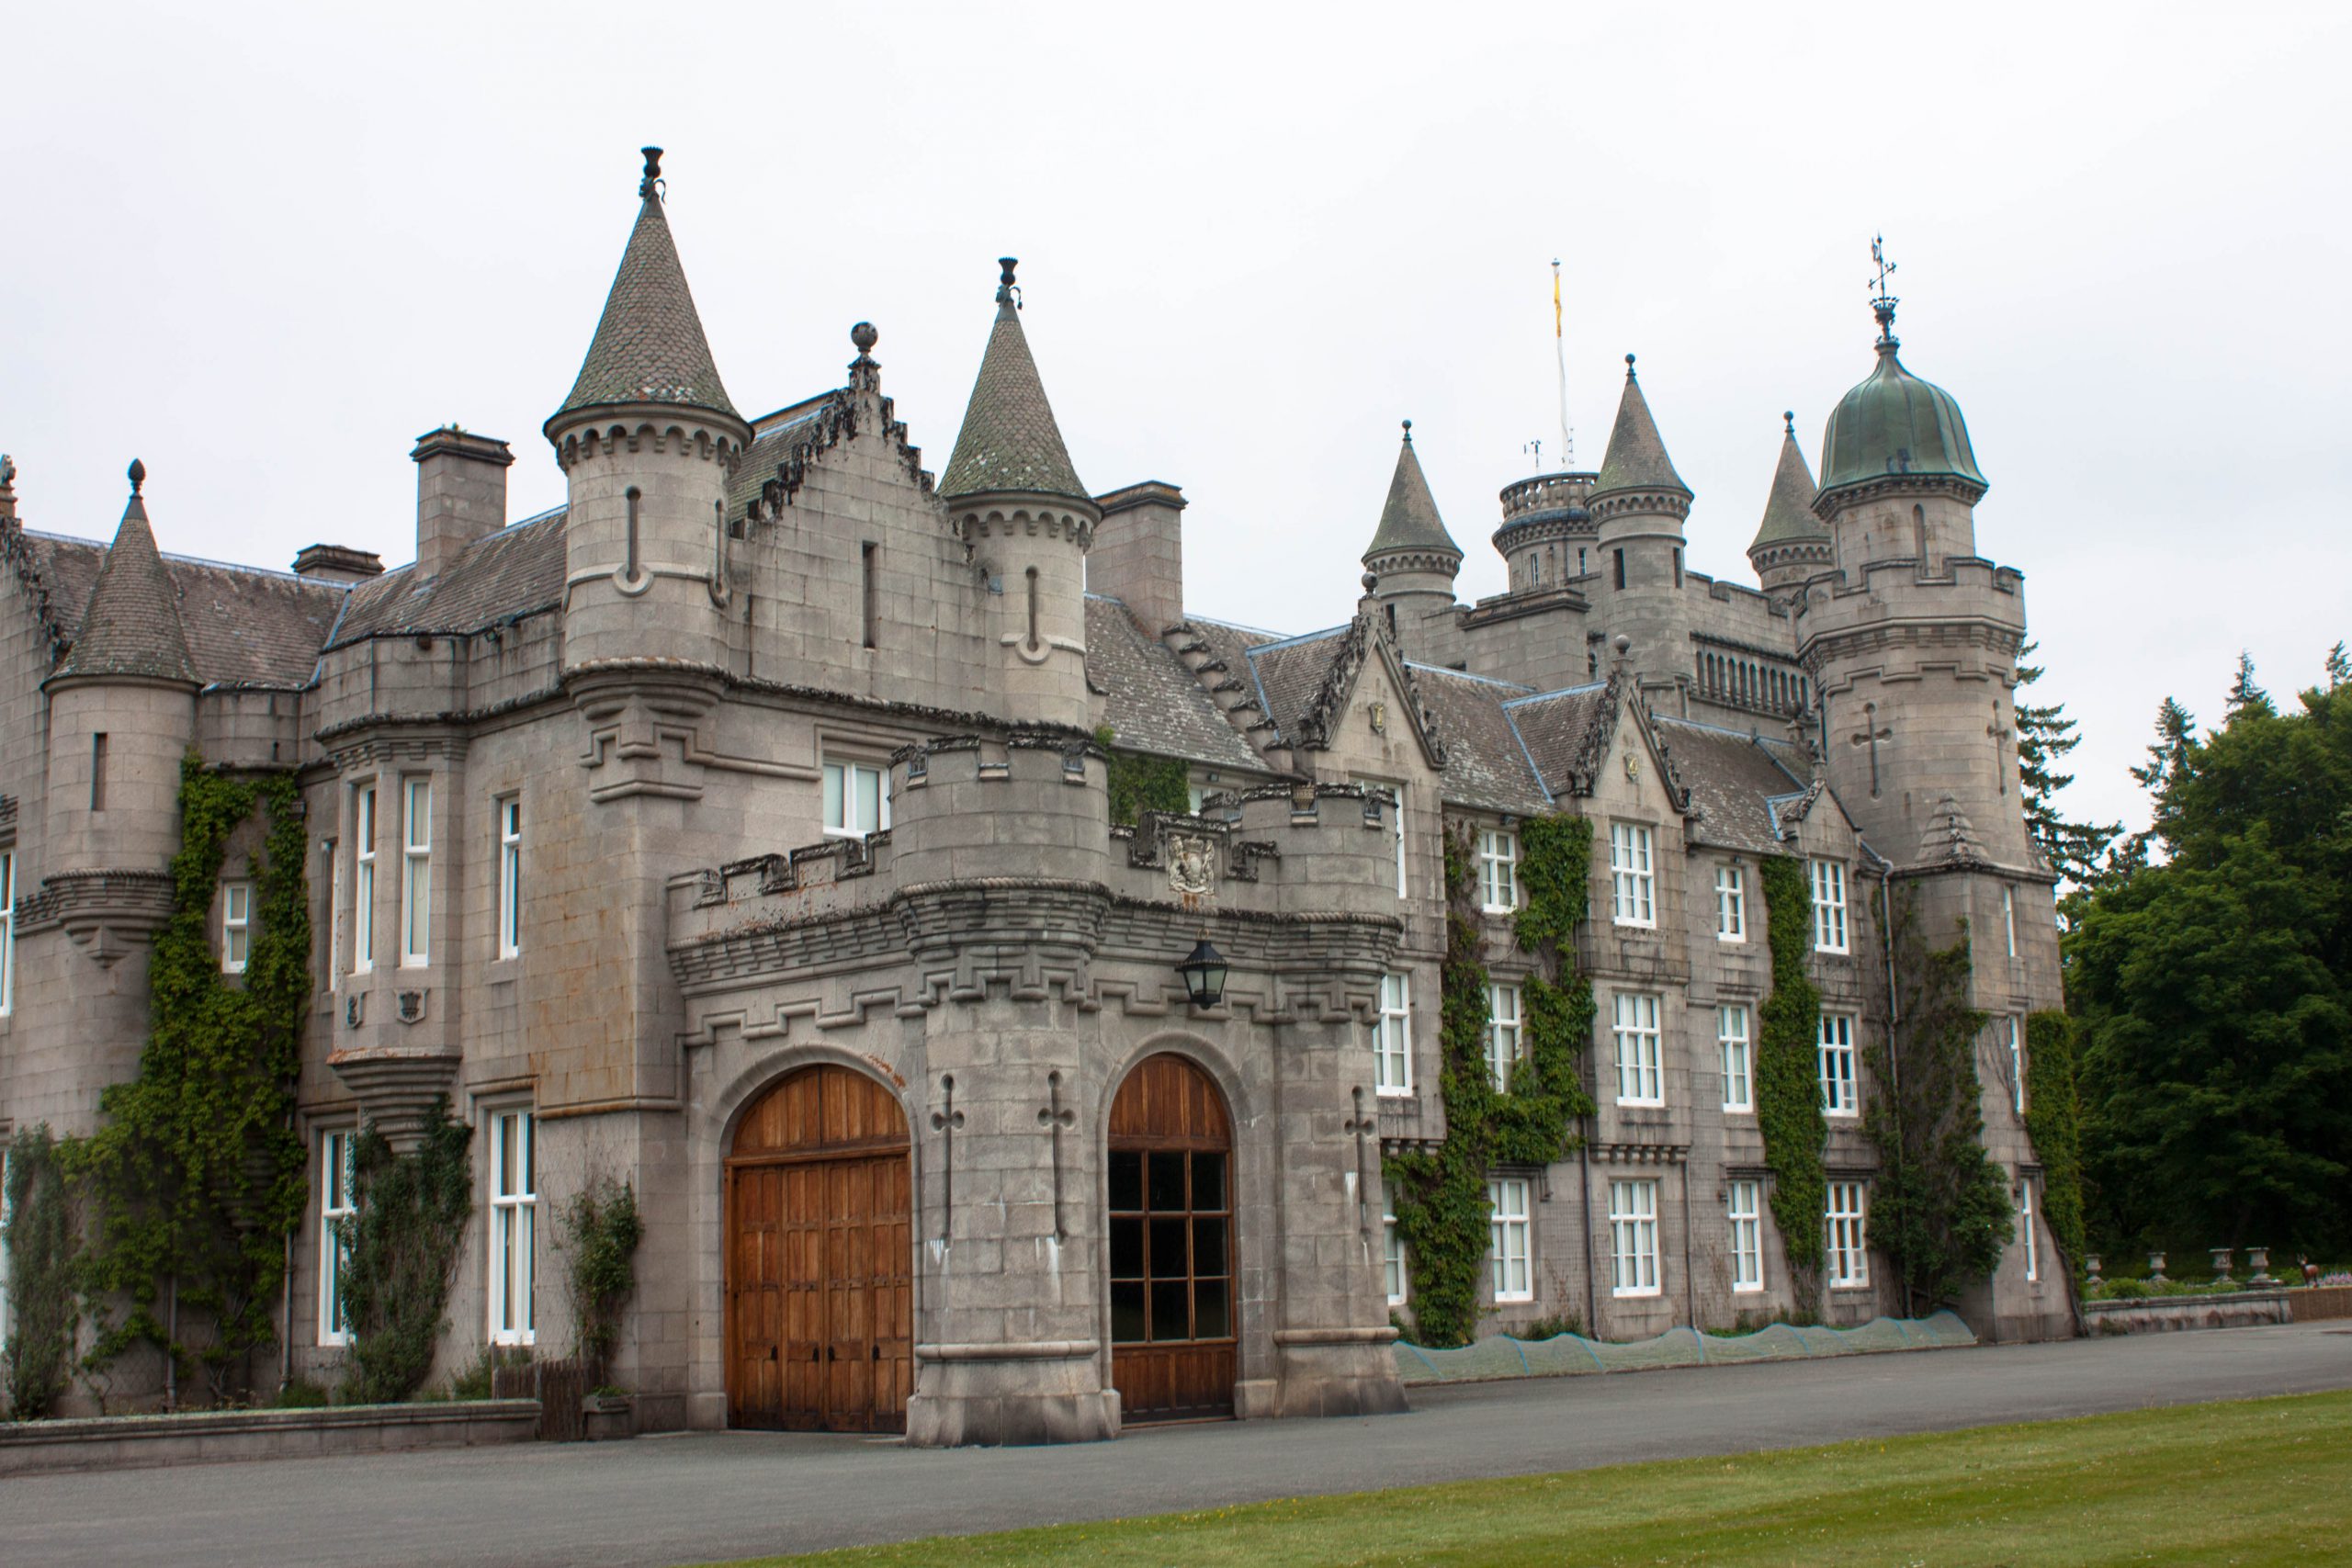 Day 13: The Malt Whisky Trail, Balmoral Castle, and an awesome Edinburgh hotel #HIUK16